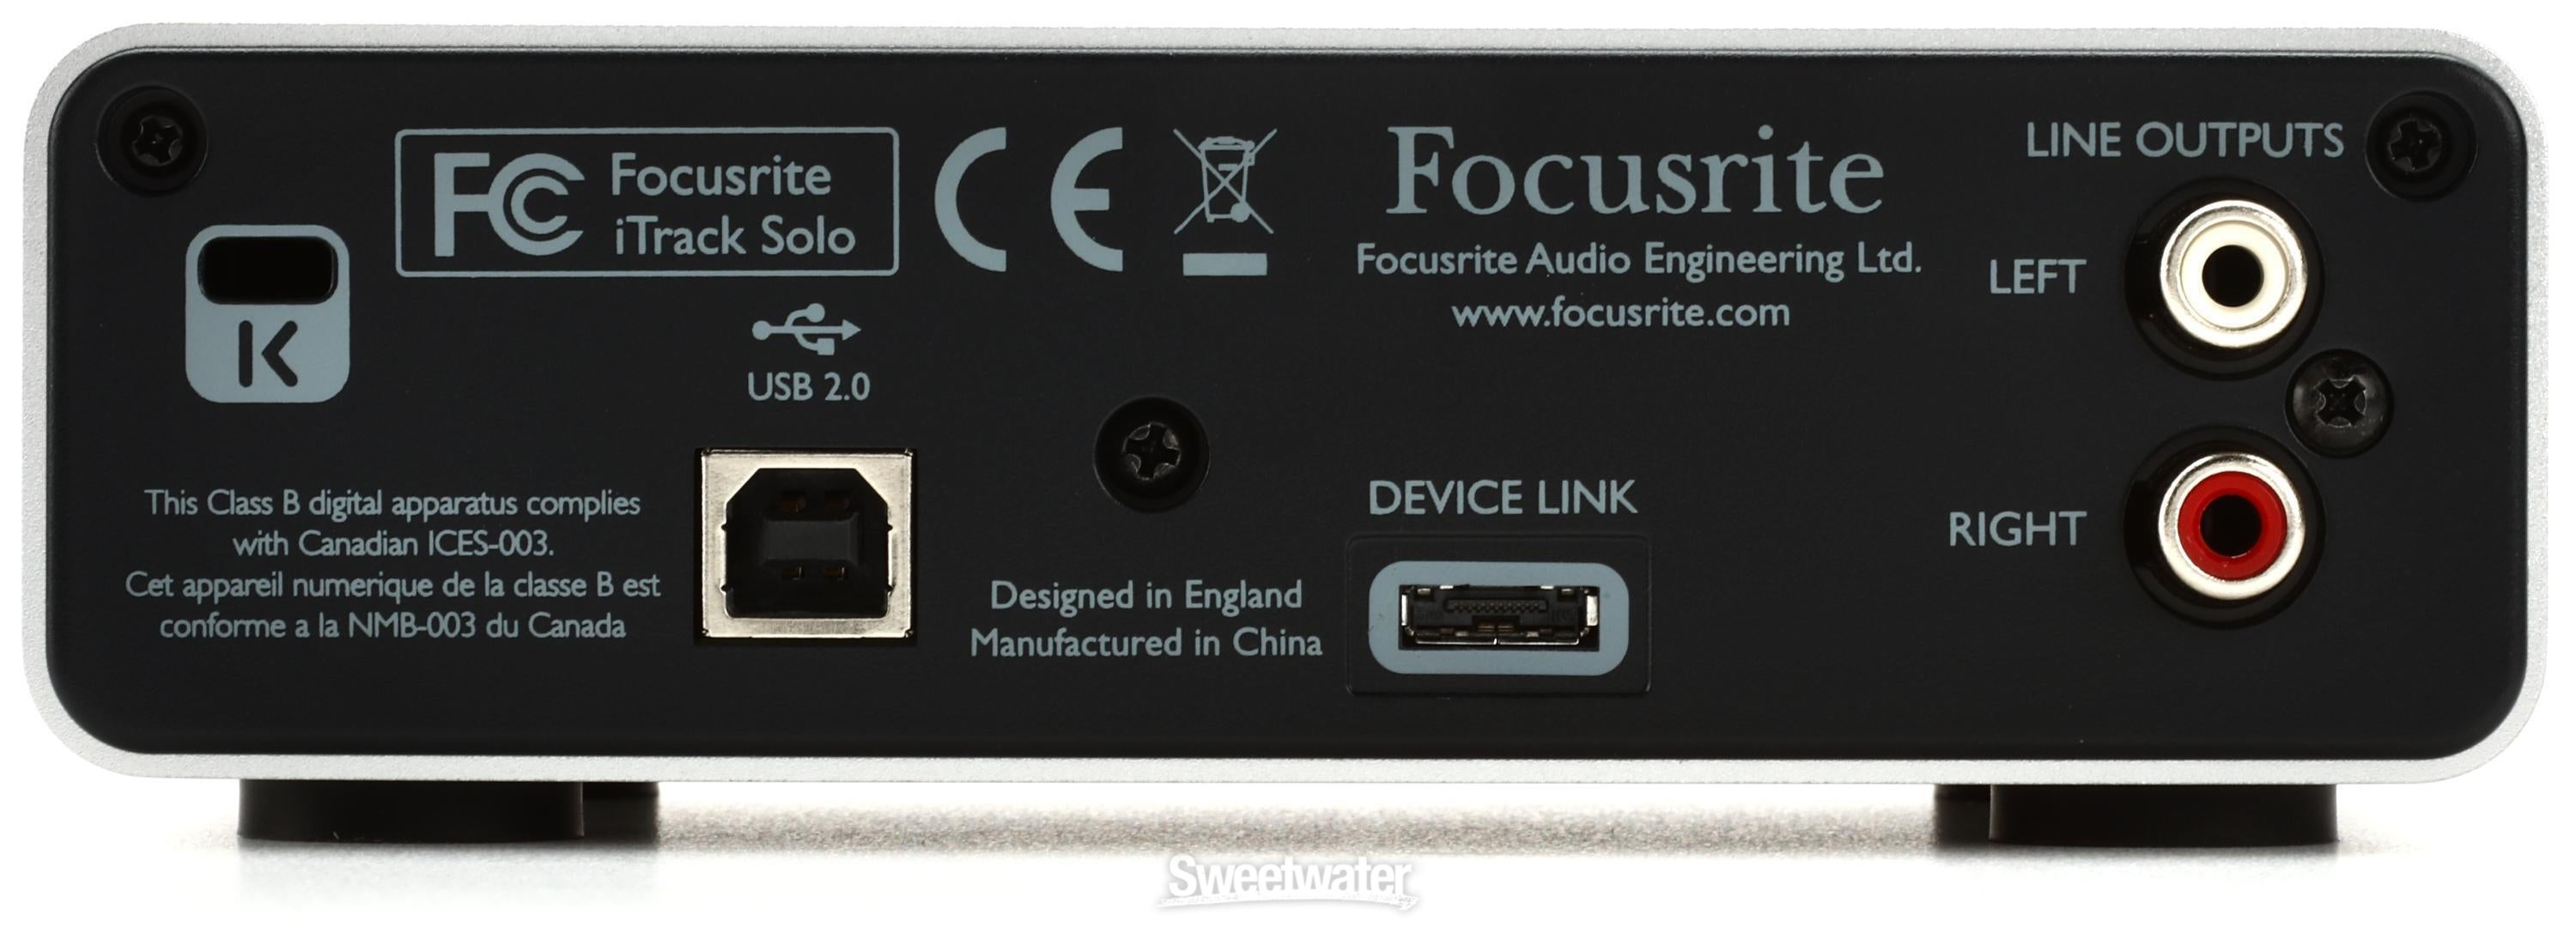 Focusrite iTrack Solo 2-channel Audio Interface with Lightning